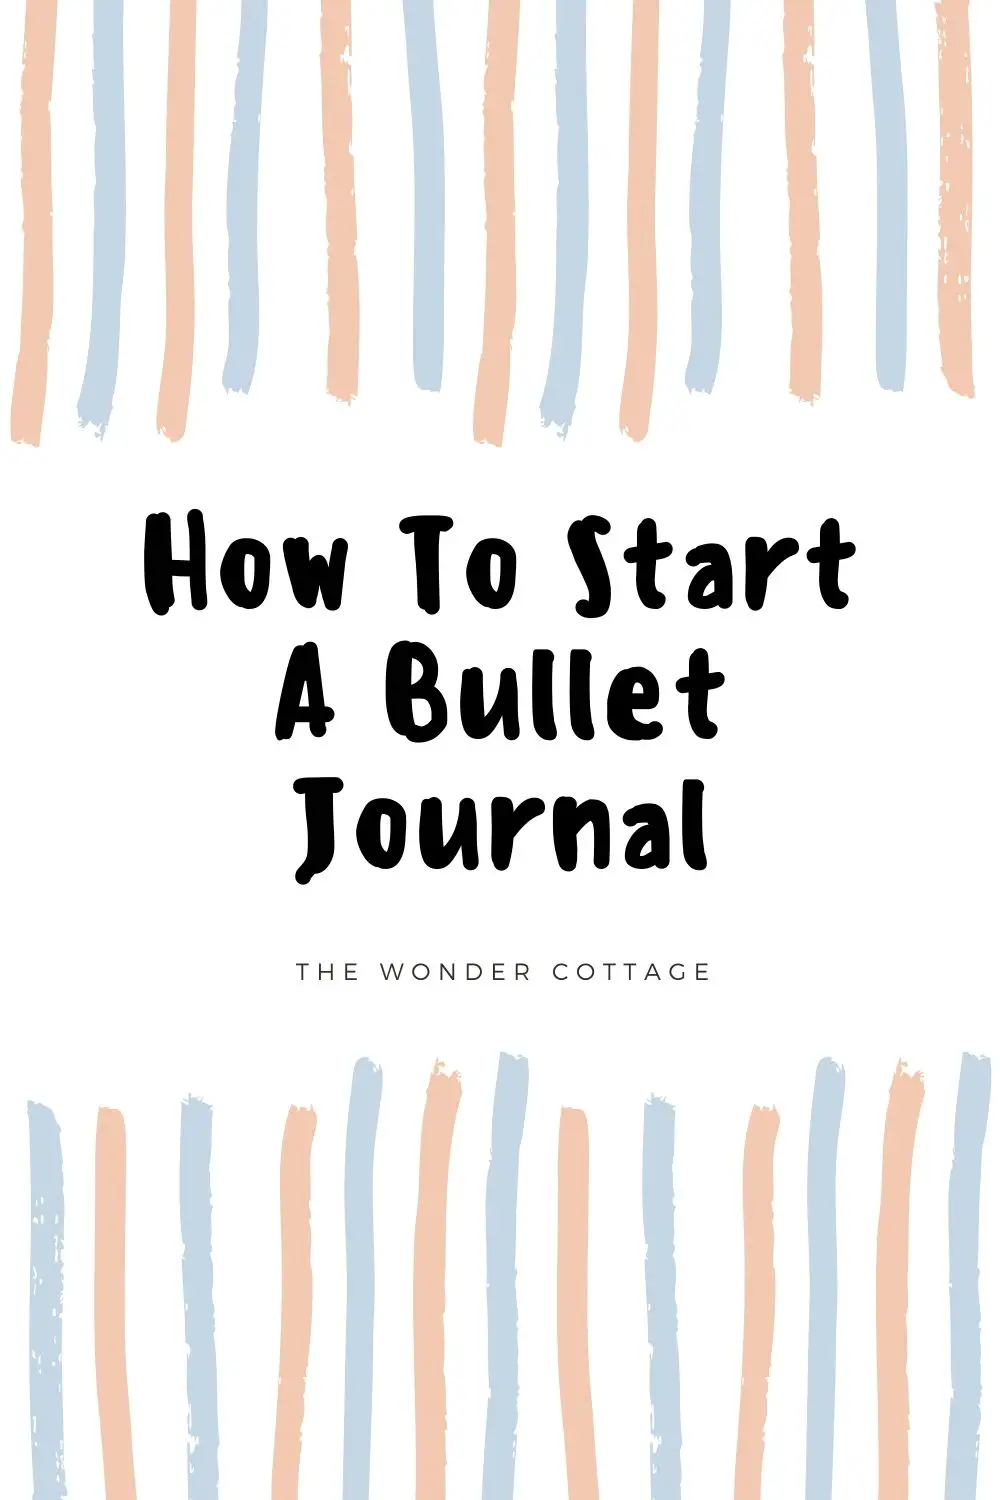 Get started with bullet journalling